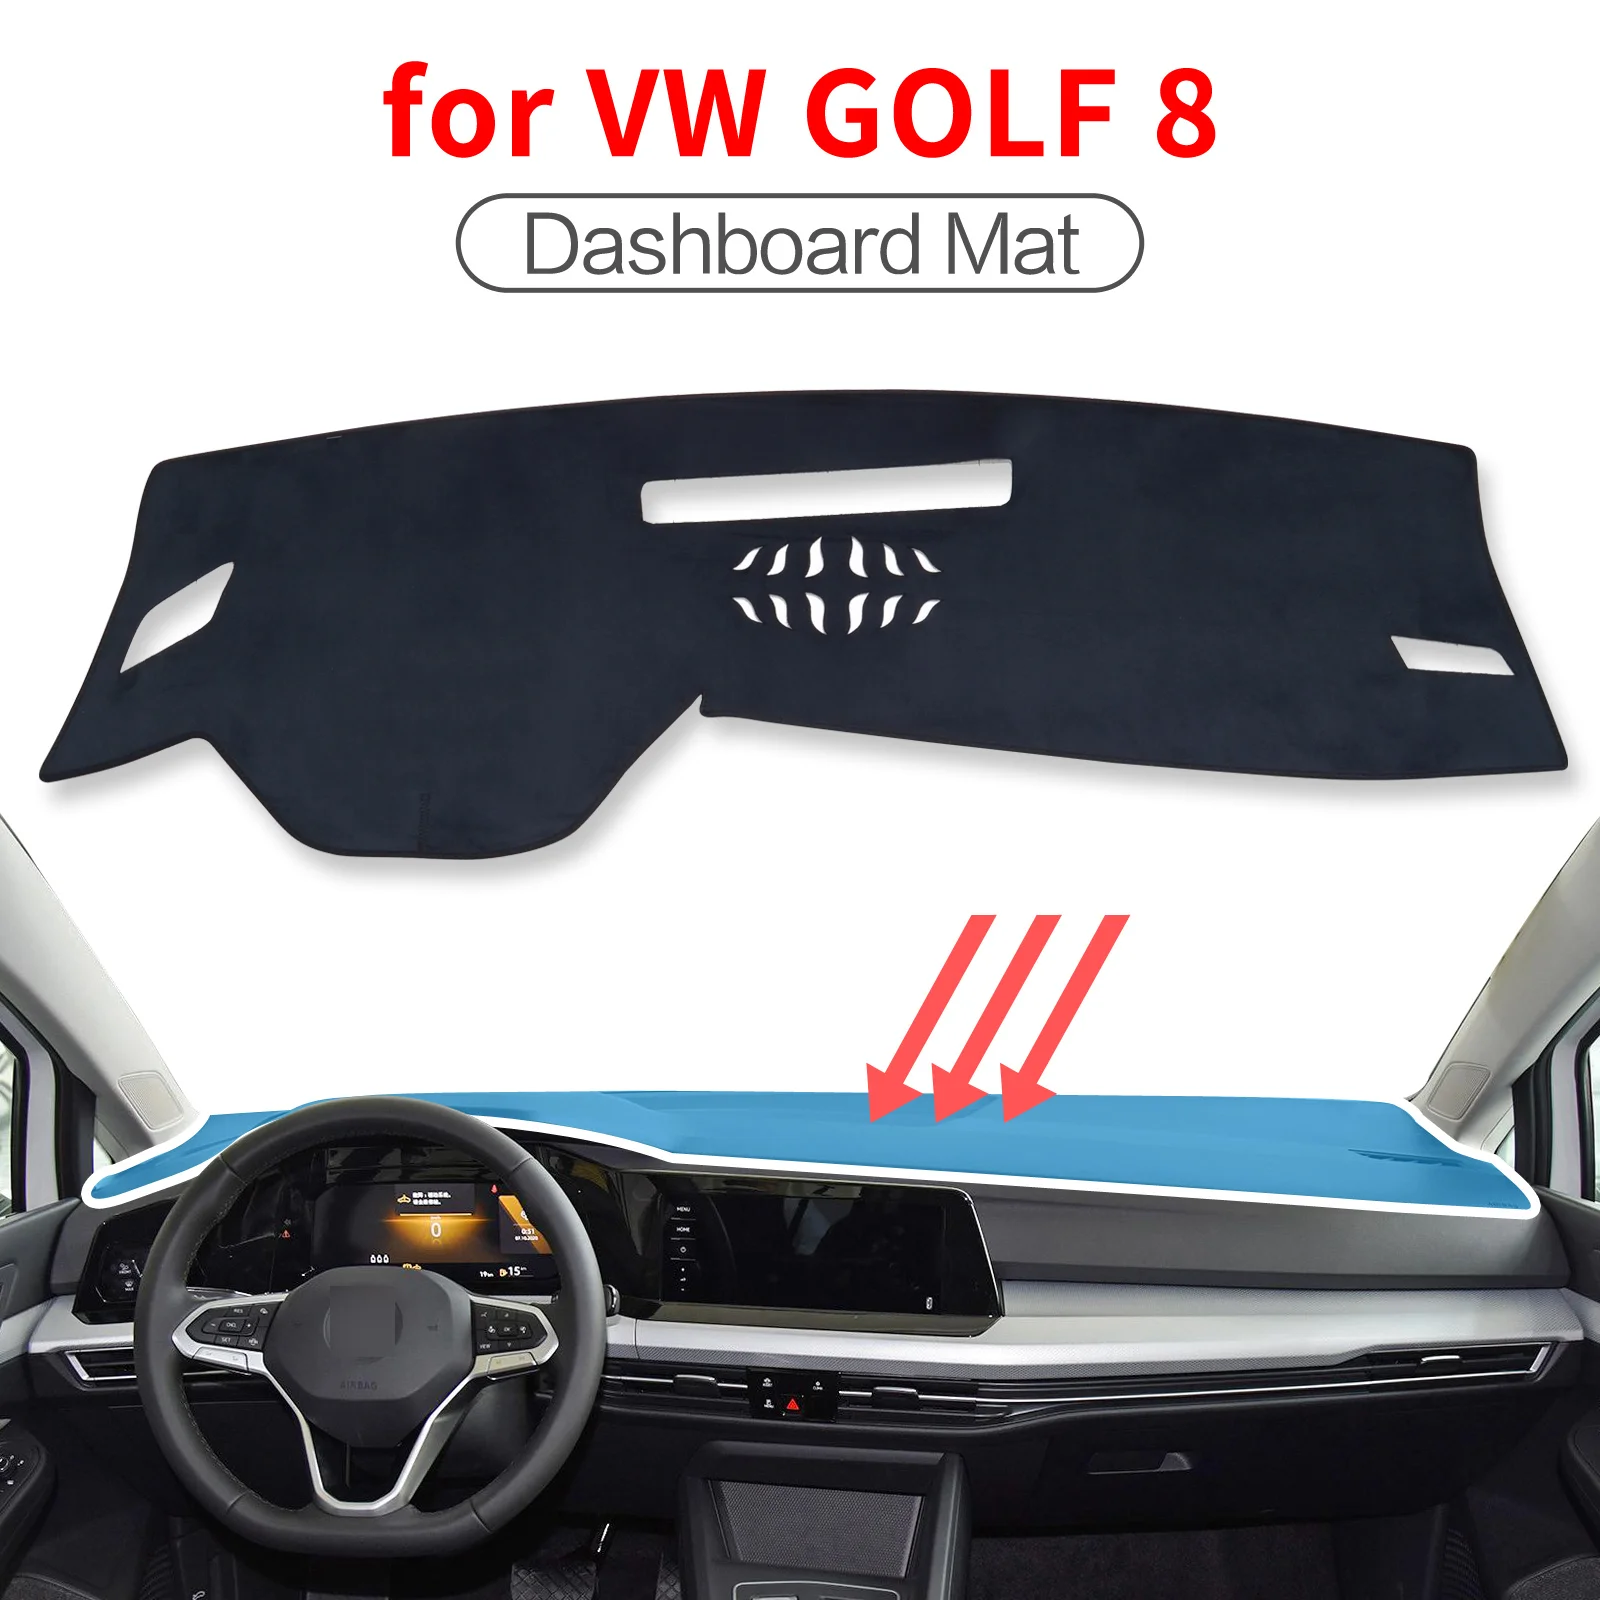 

Smabee Dash Mat Dashmat Fit For VW GOLF 8 2020 2021 MK8 GTI R Anti-Slip Mat Dashboard Cover Protection pad Sunshade Accessories